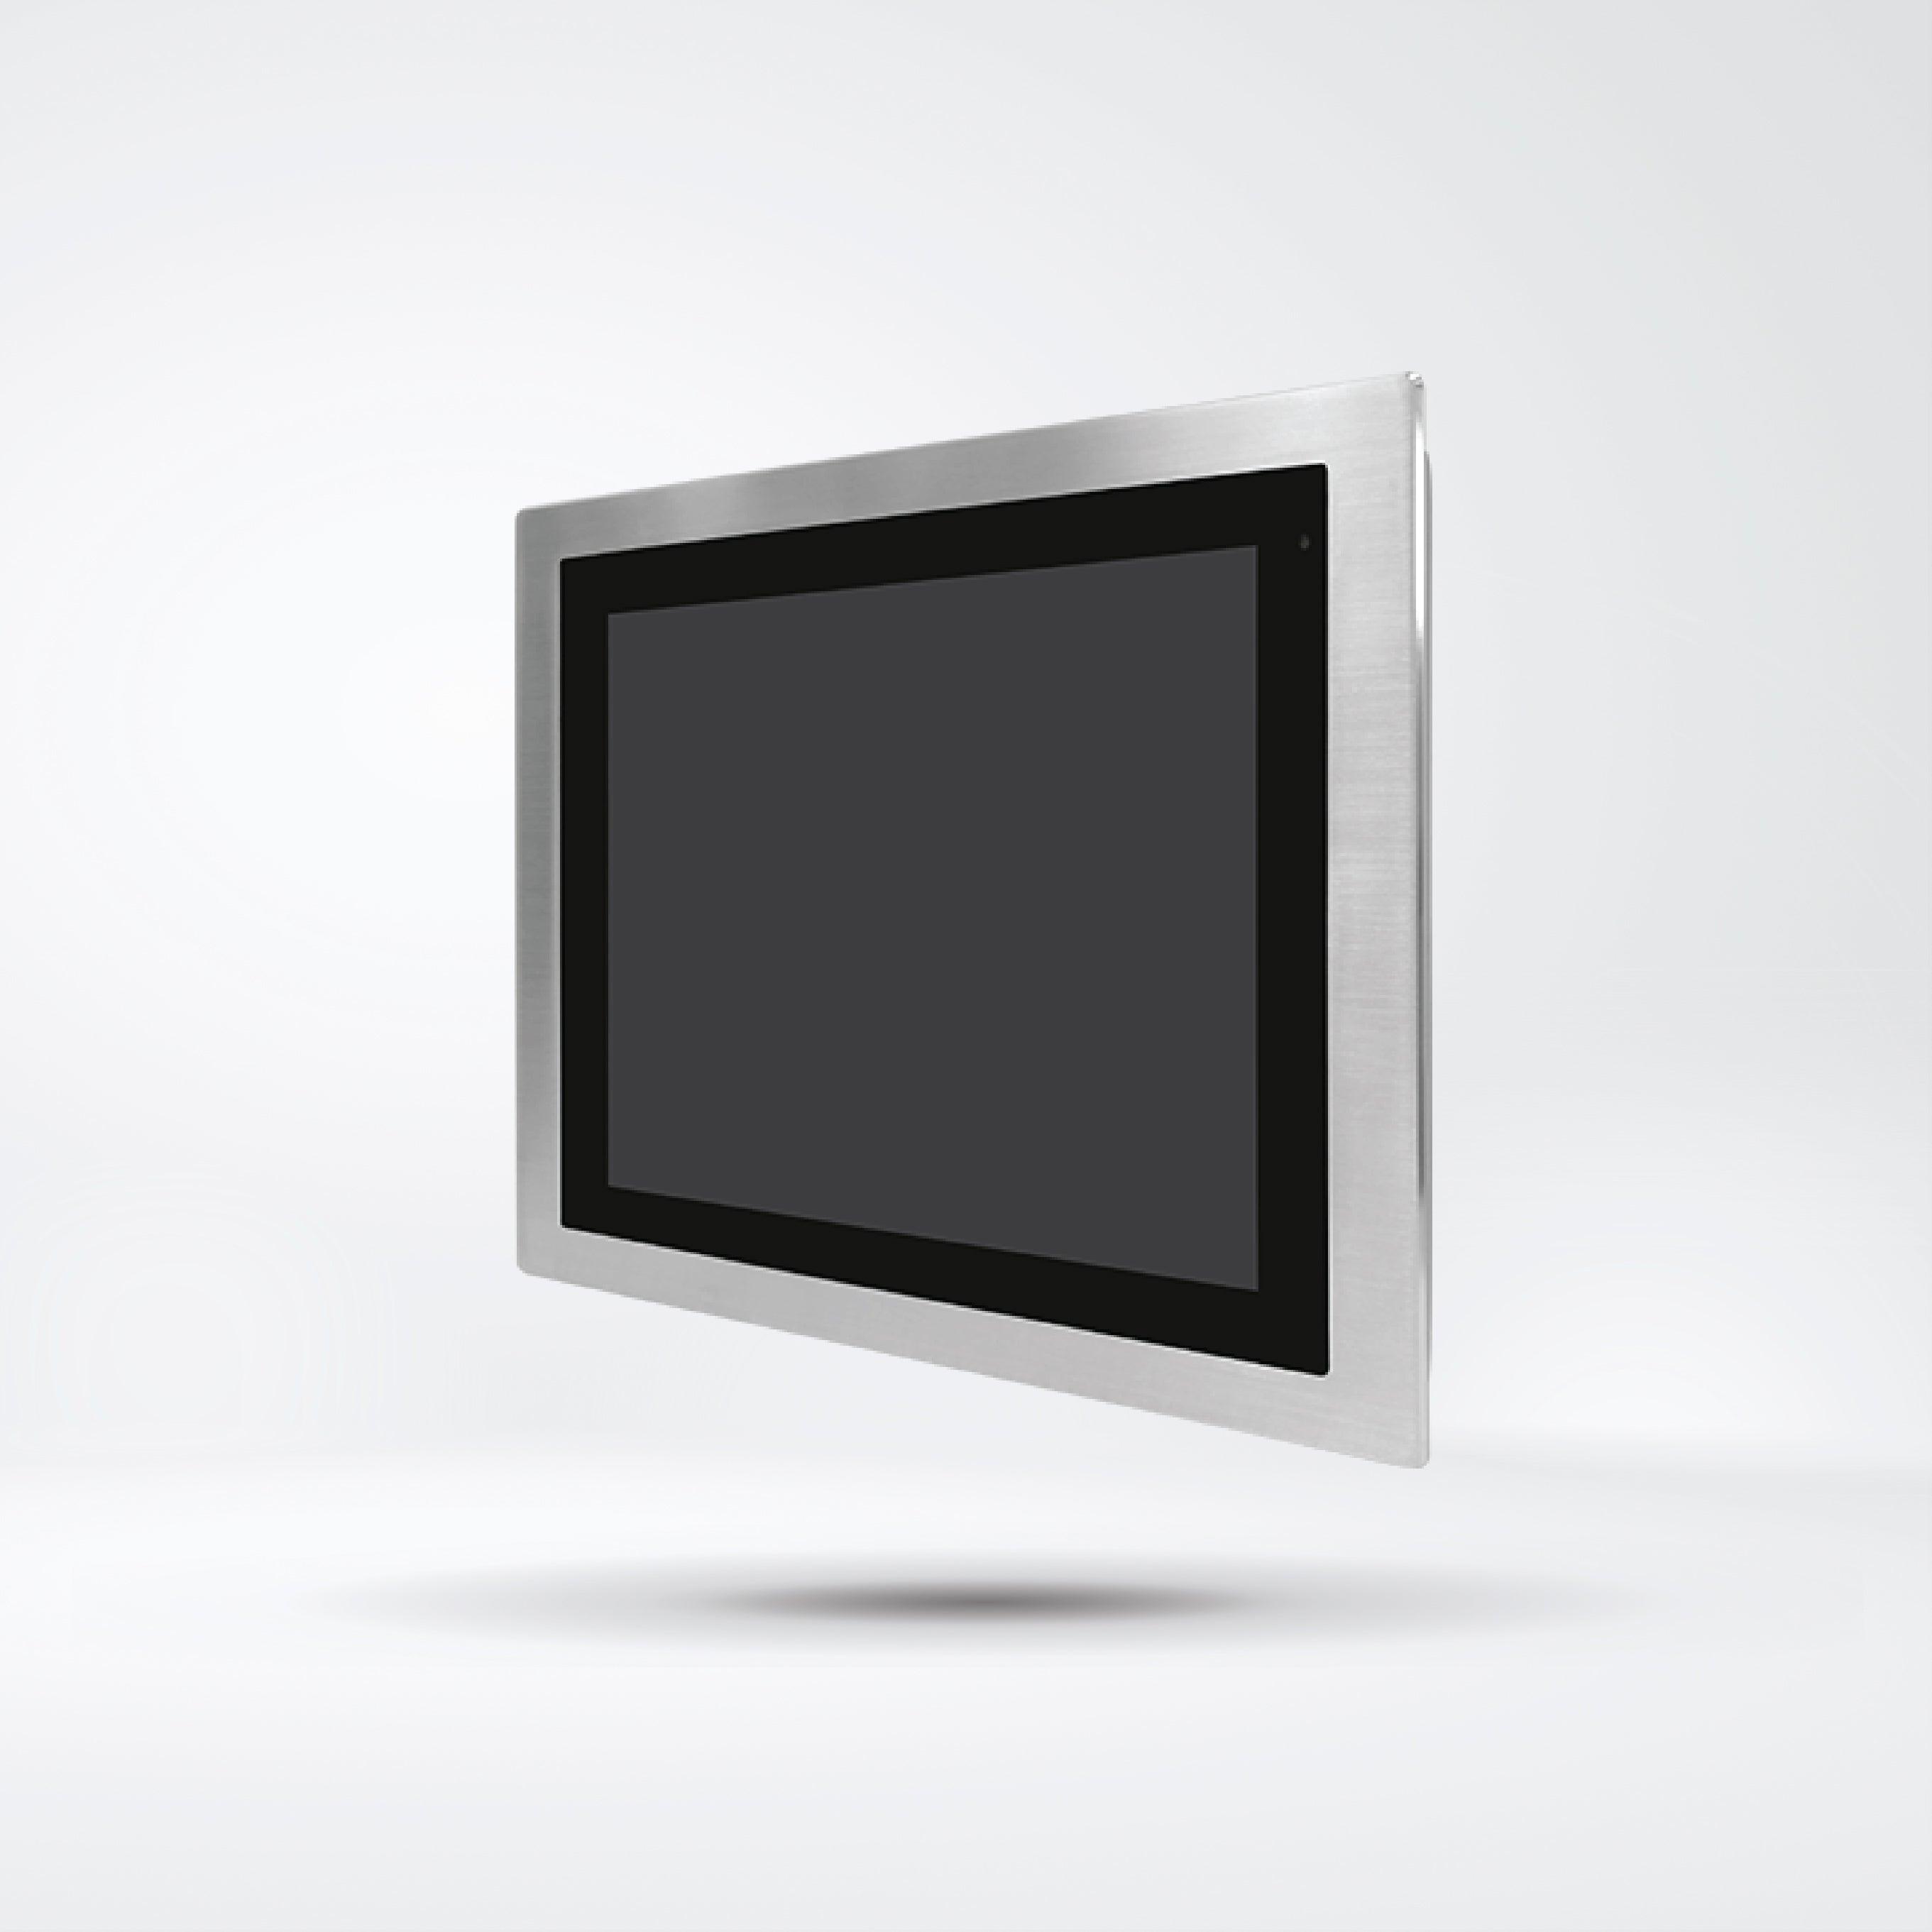 FABS-115GH 15” Flat Front Panel IP66 Stainless Chassis Display - Riverplus